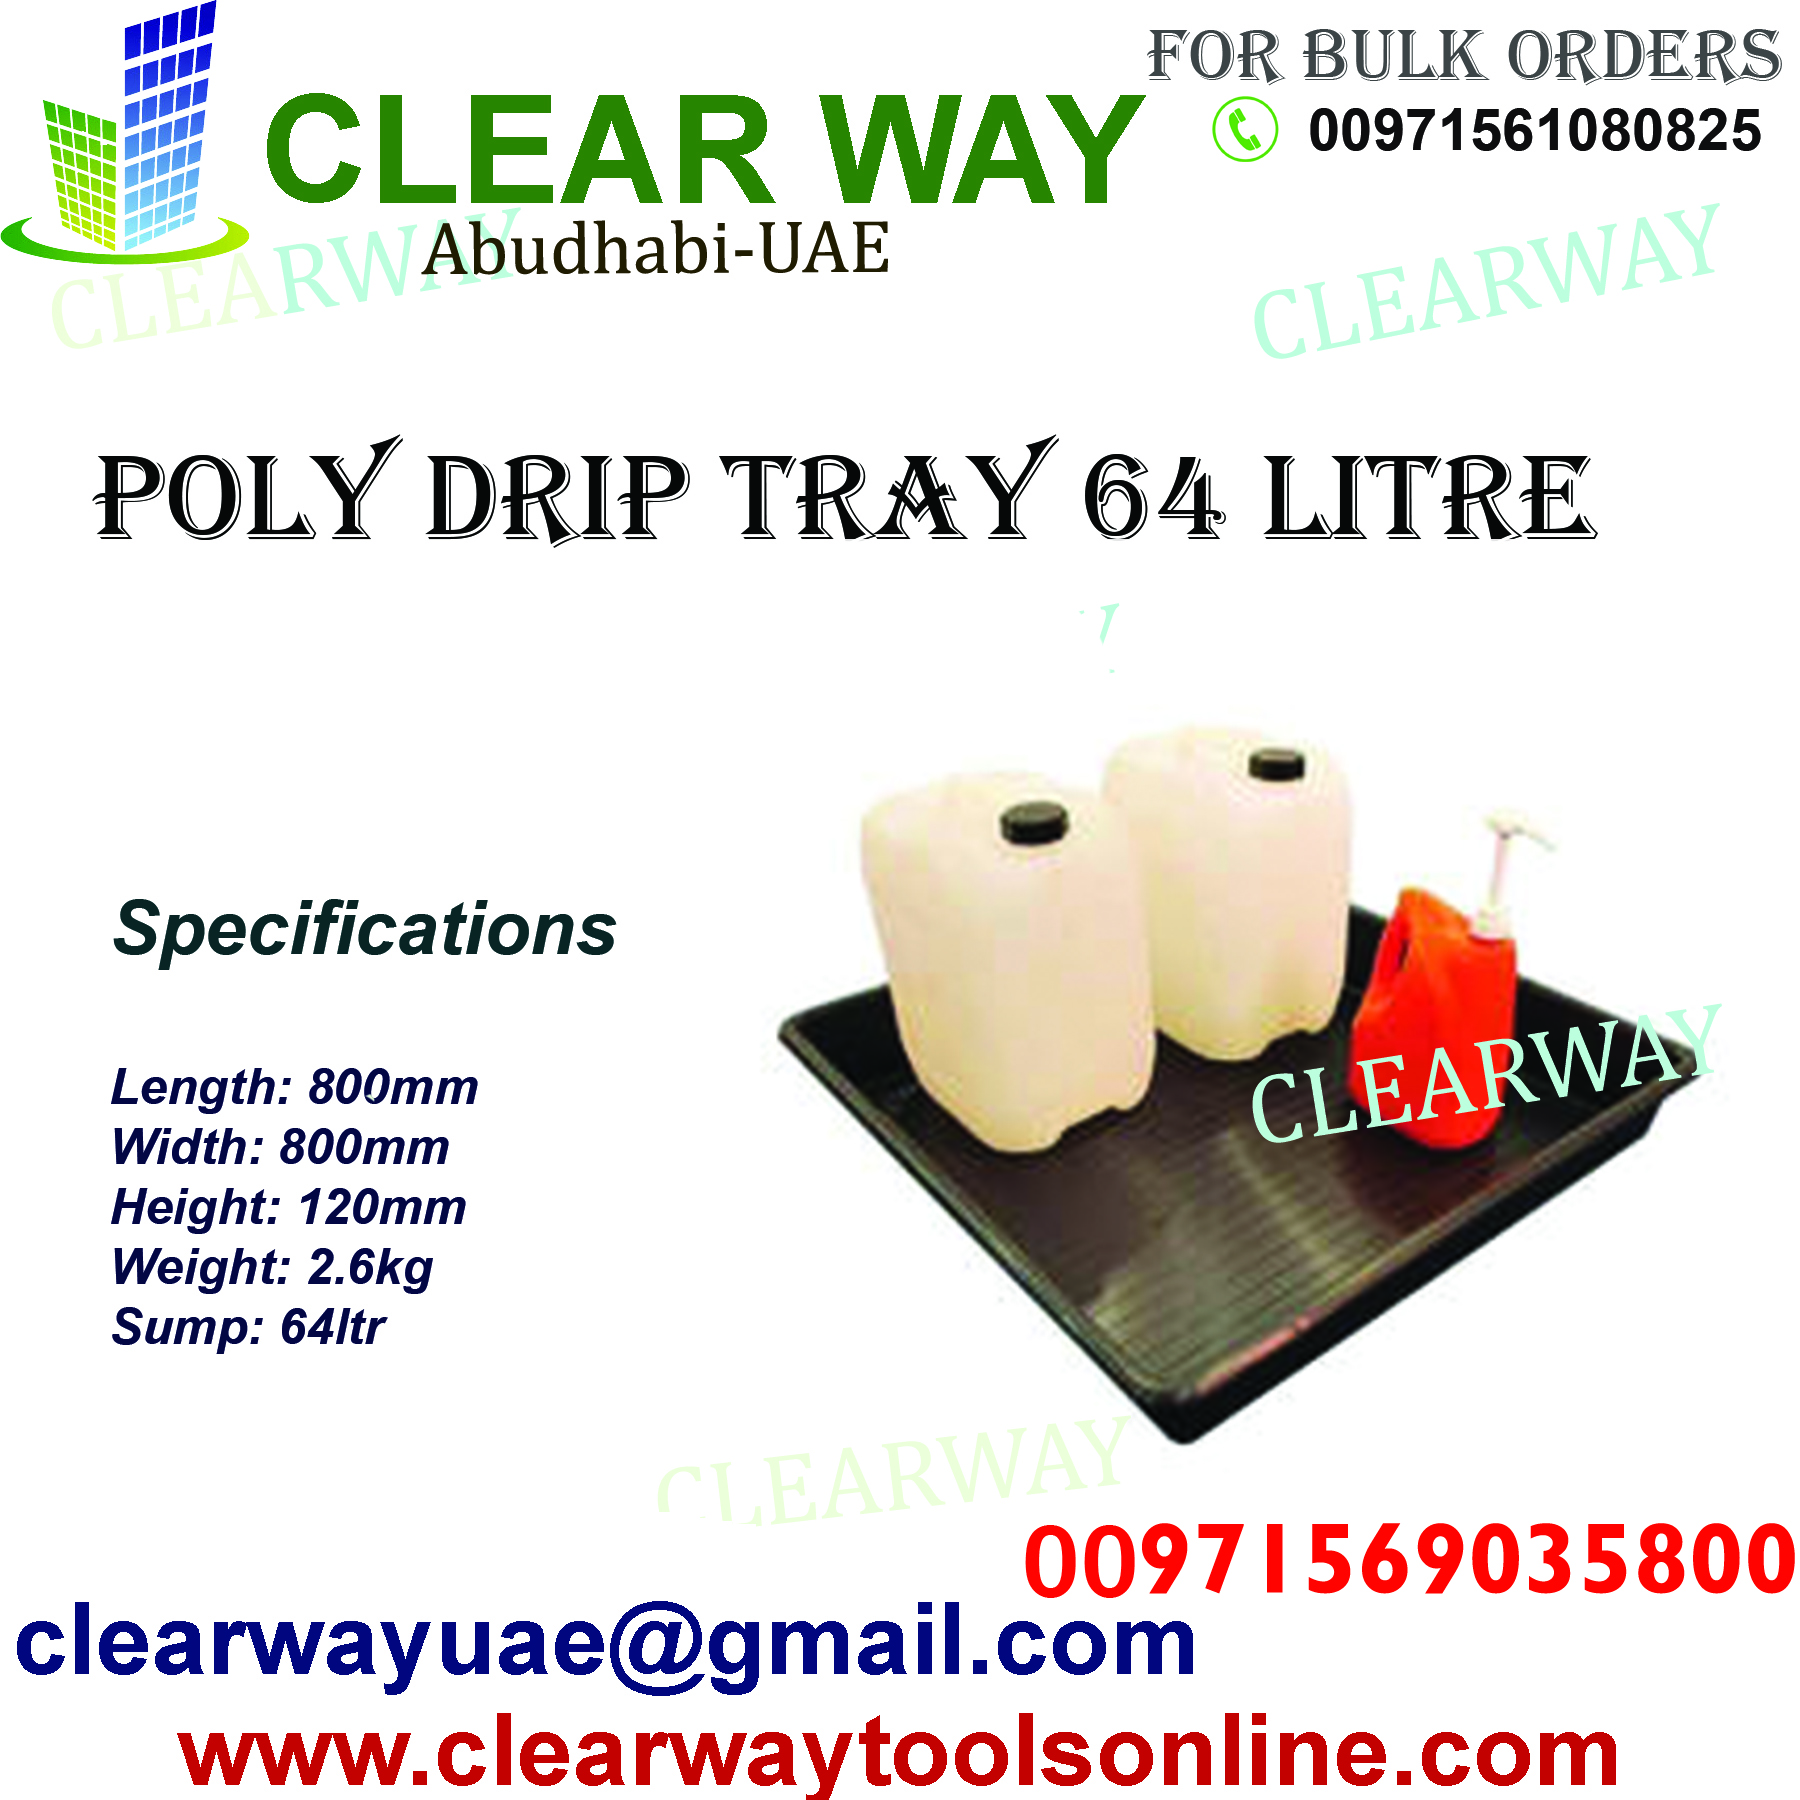 POLY DRIP TRAY 64 LITRE DEALER IN MUSSAFAH , ABUDHABI , UAE BY CLEARWAY